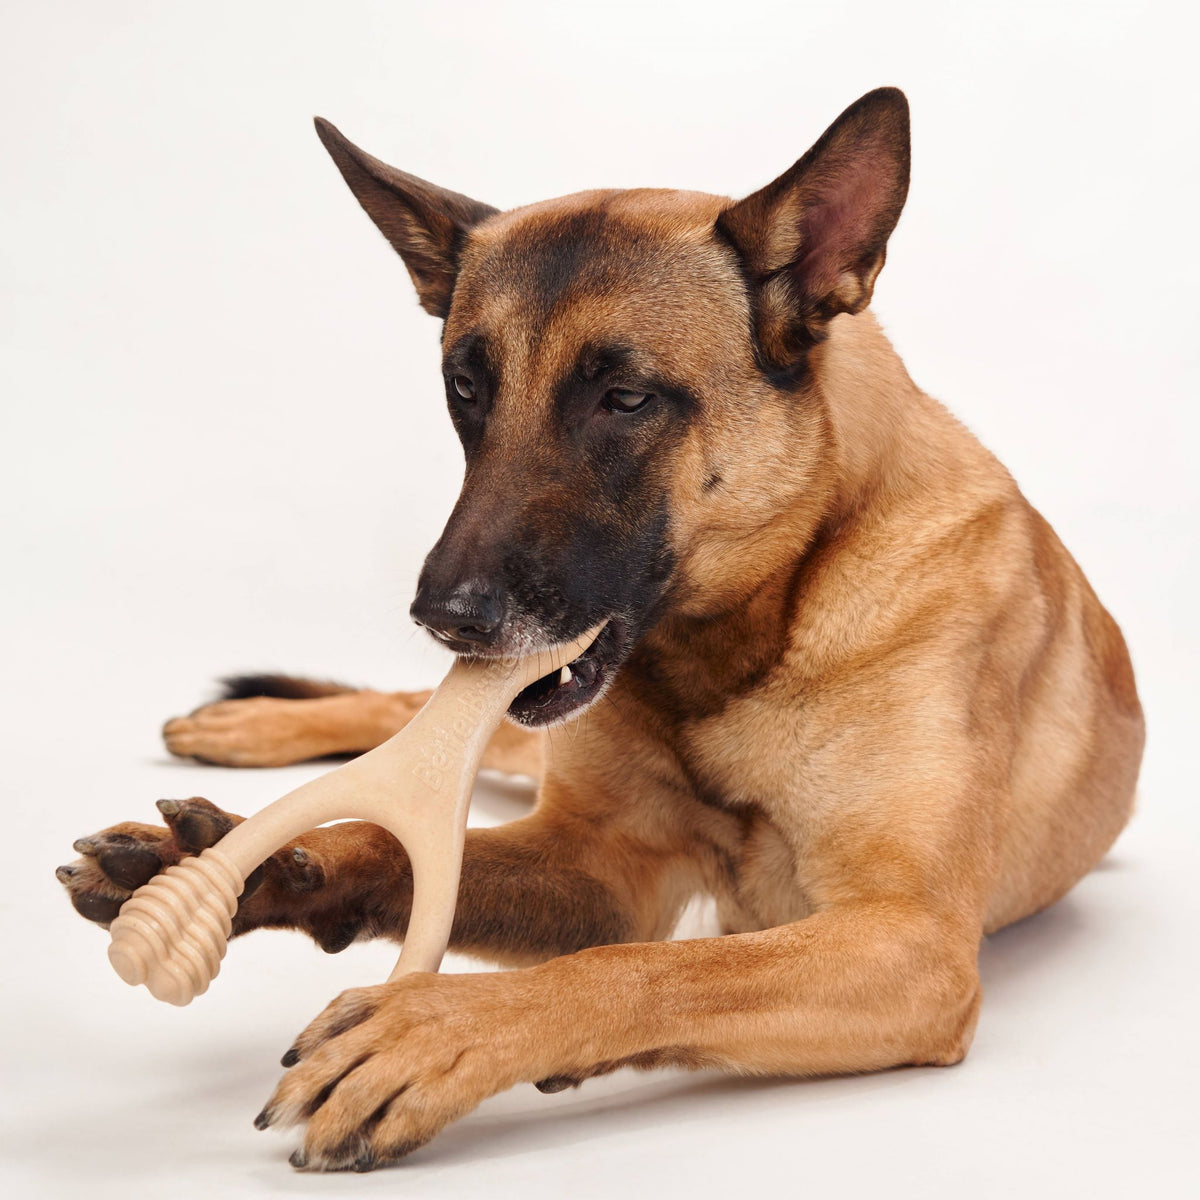 BetterBone Medium Density- Perfect for medium to strong chewers! Natural, healthier, safer.